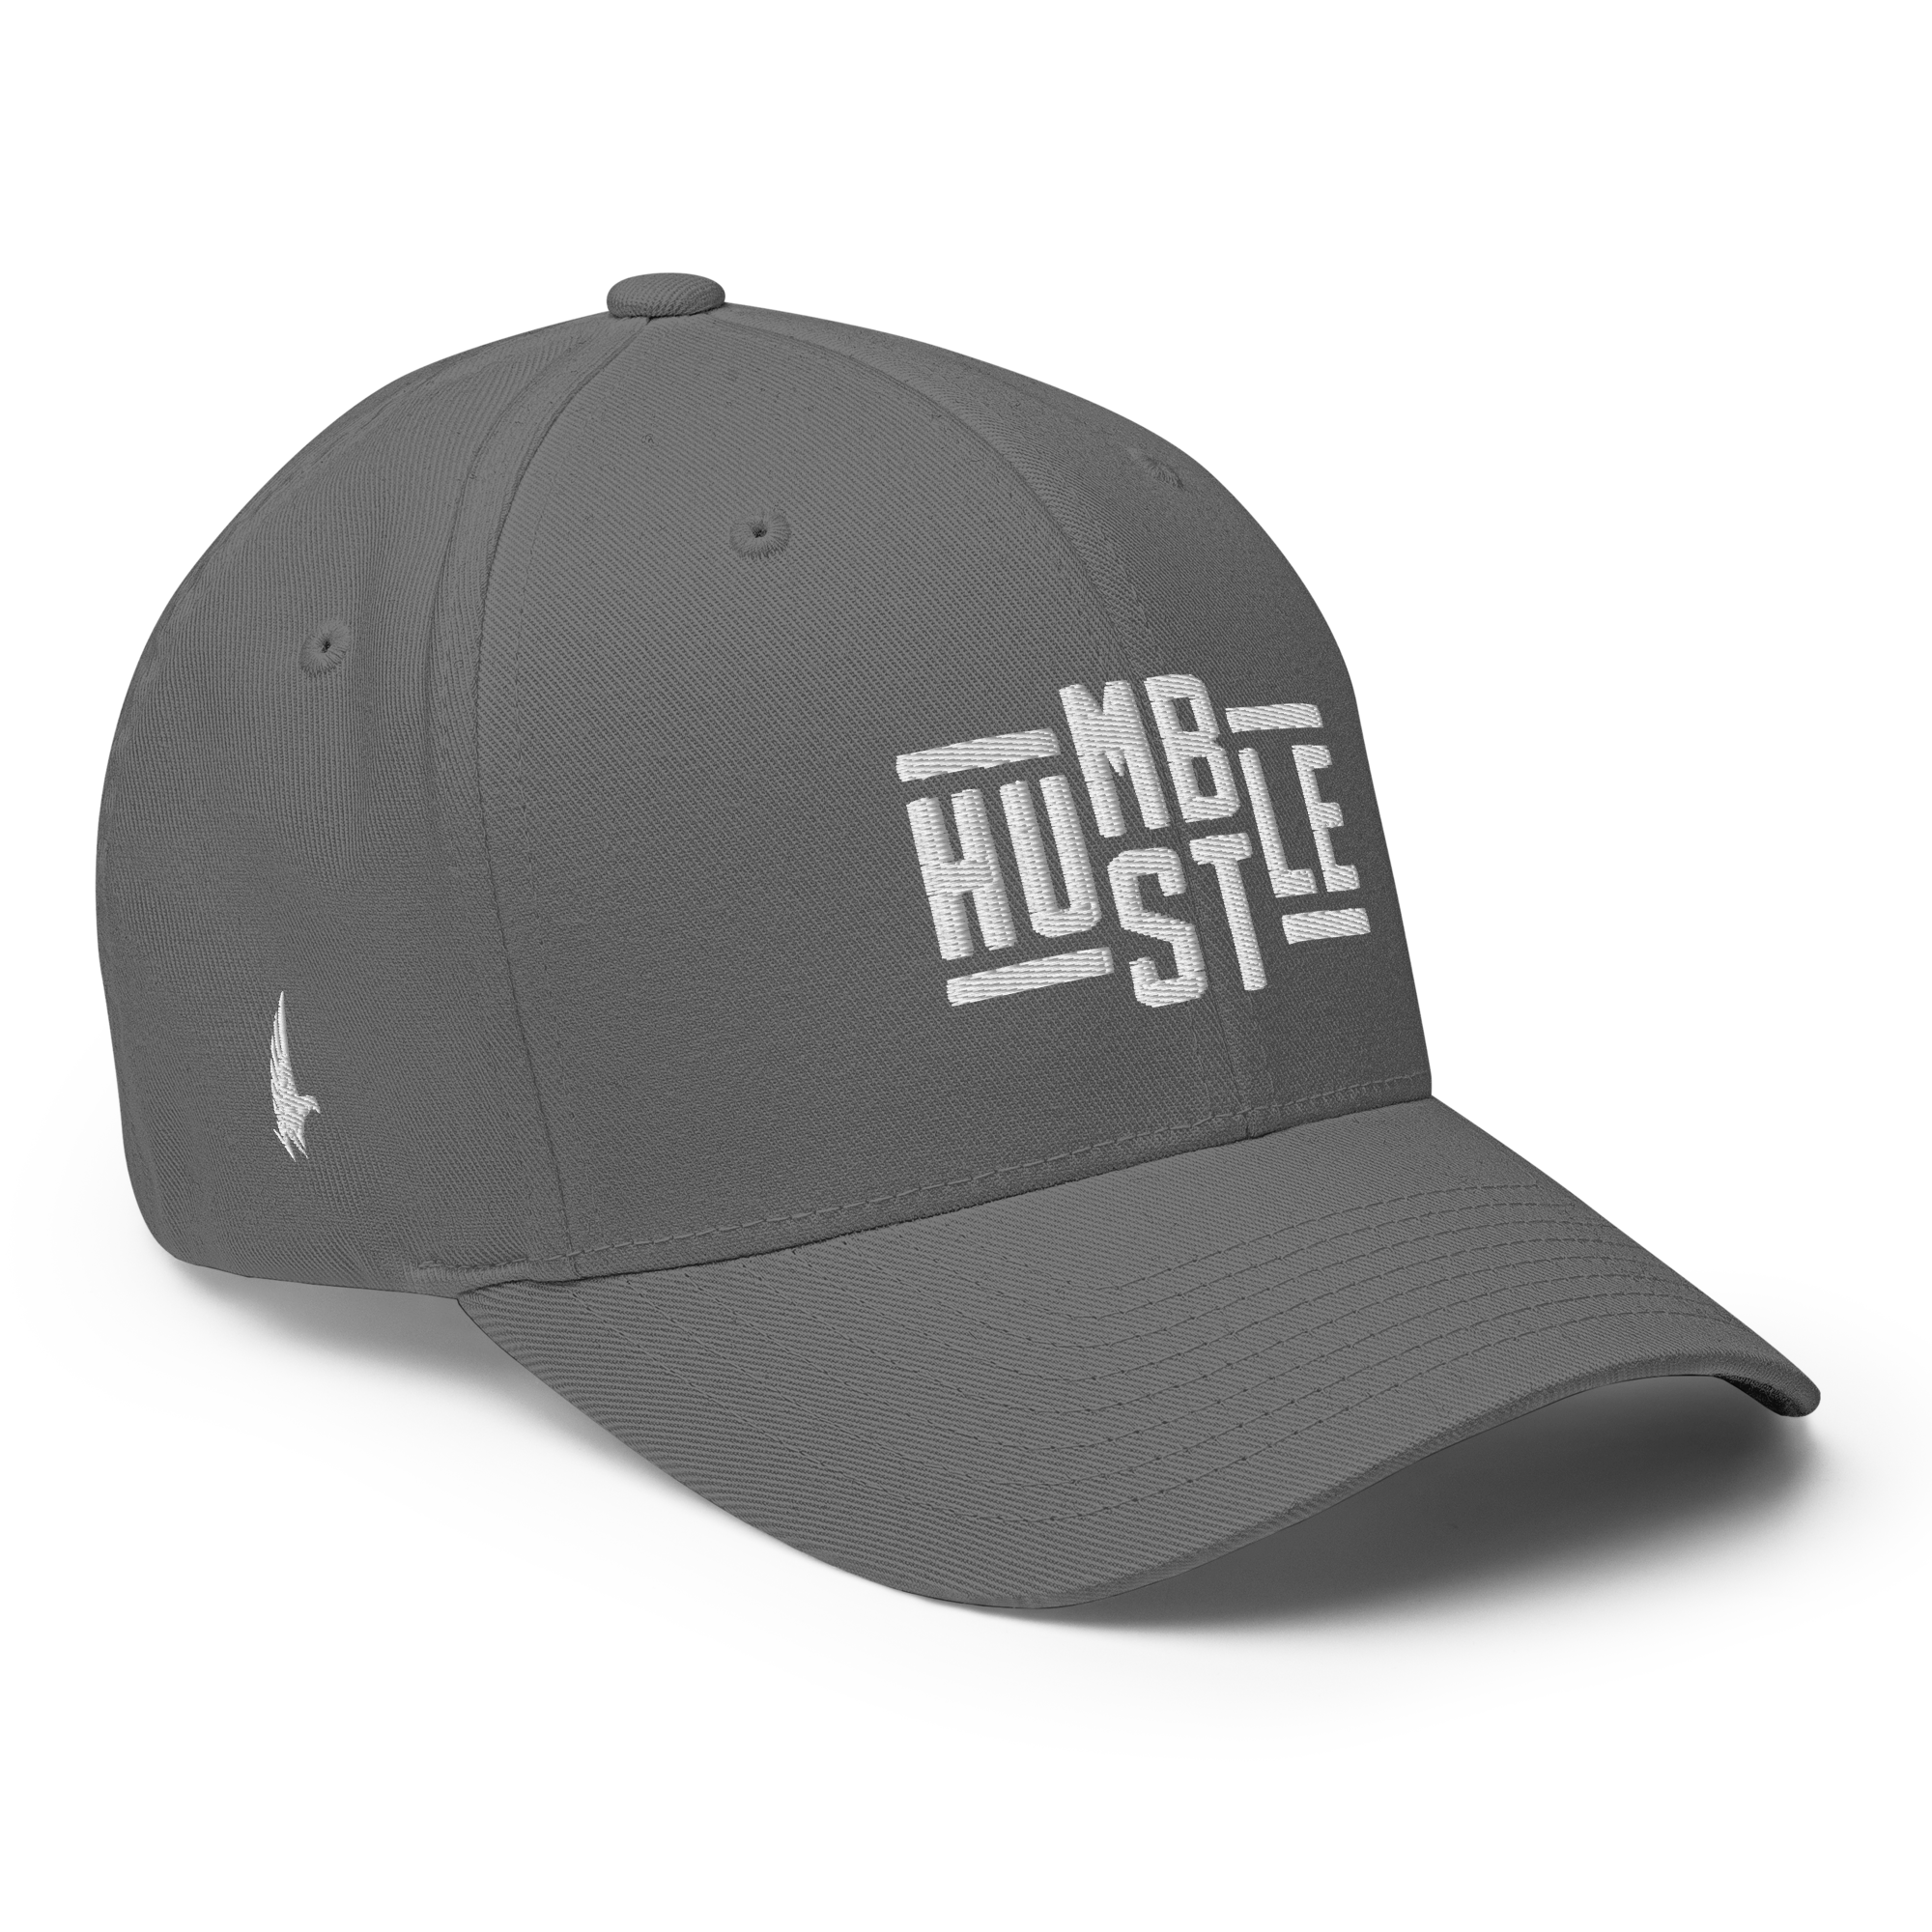 Loyalty Vibes Hustle Fitted Hat - Gray / White Fitted - Loyalty Vibes